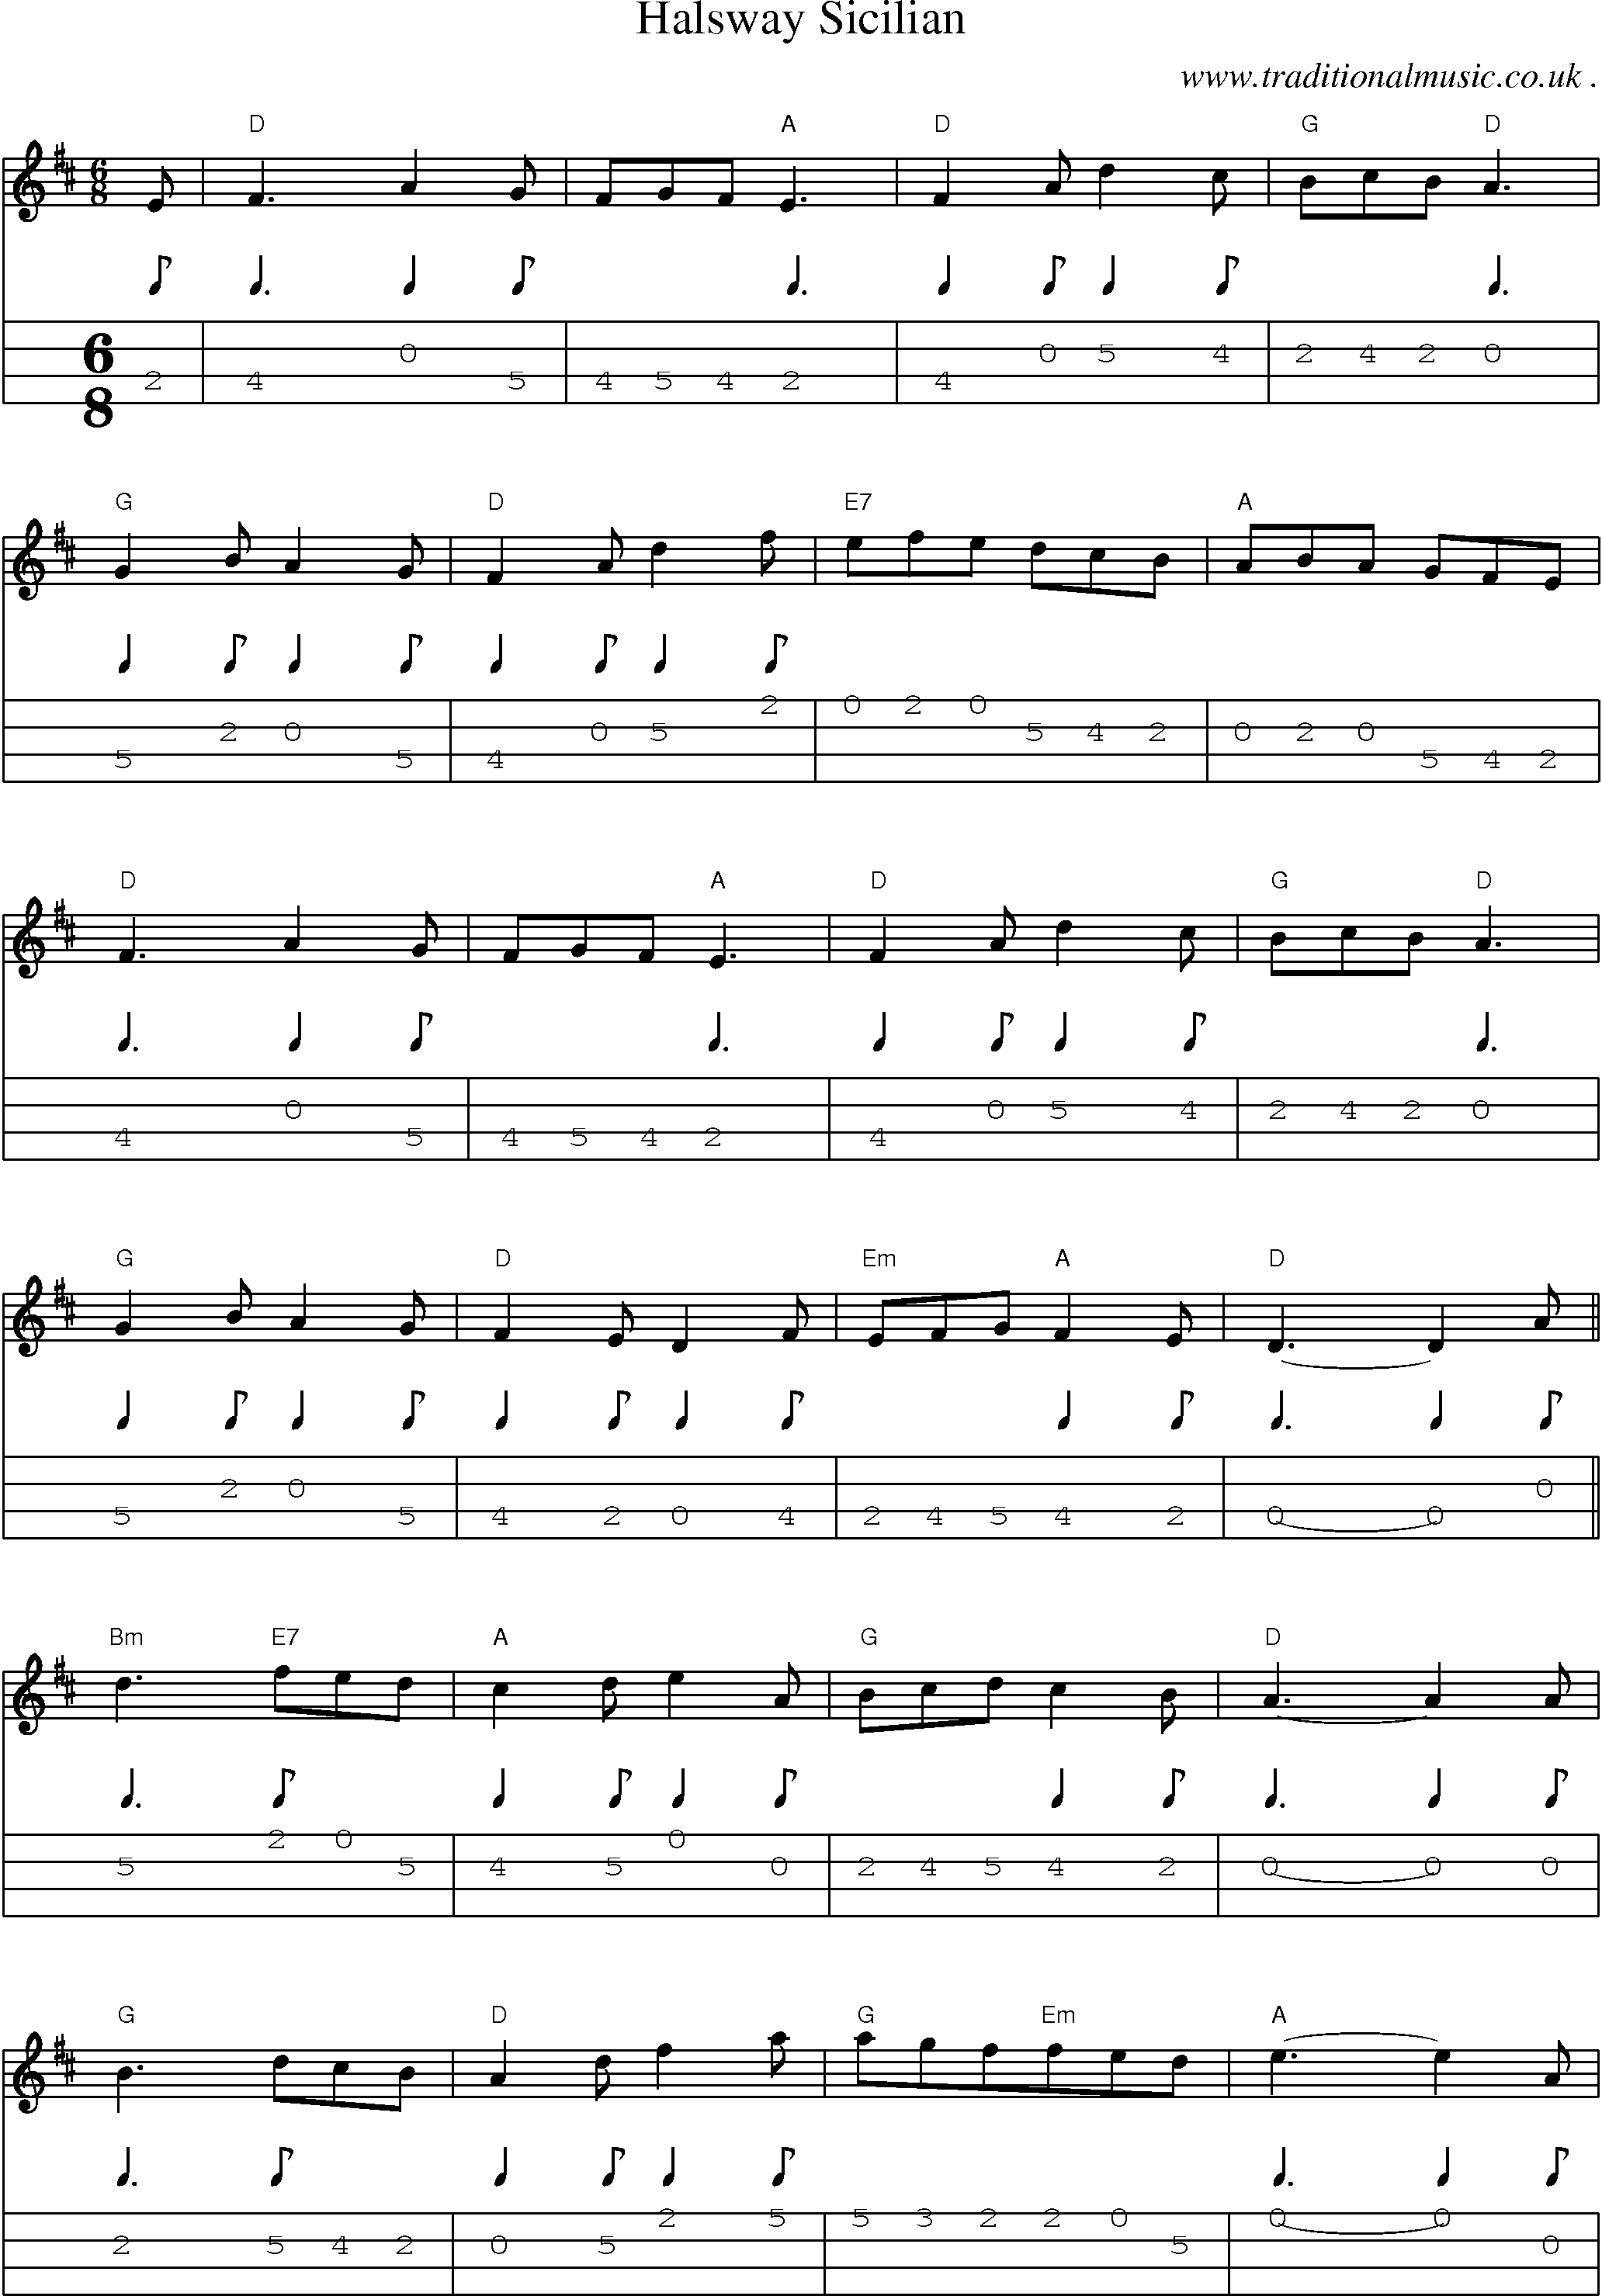 Sheet-Music and Mandolin Tabs for Halsway Sicilian